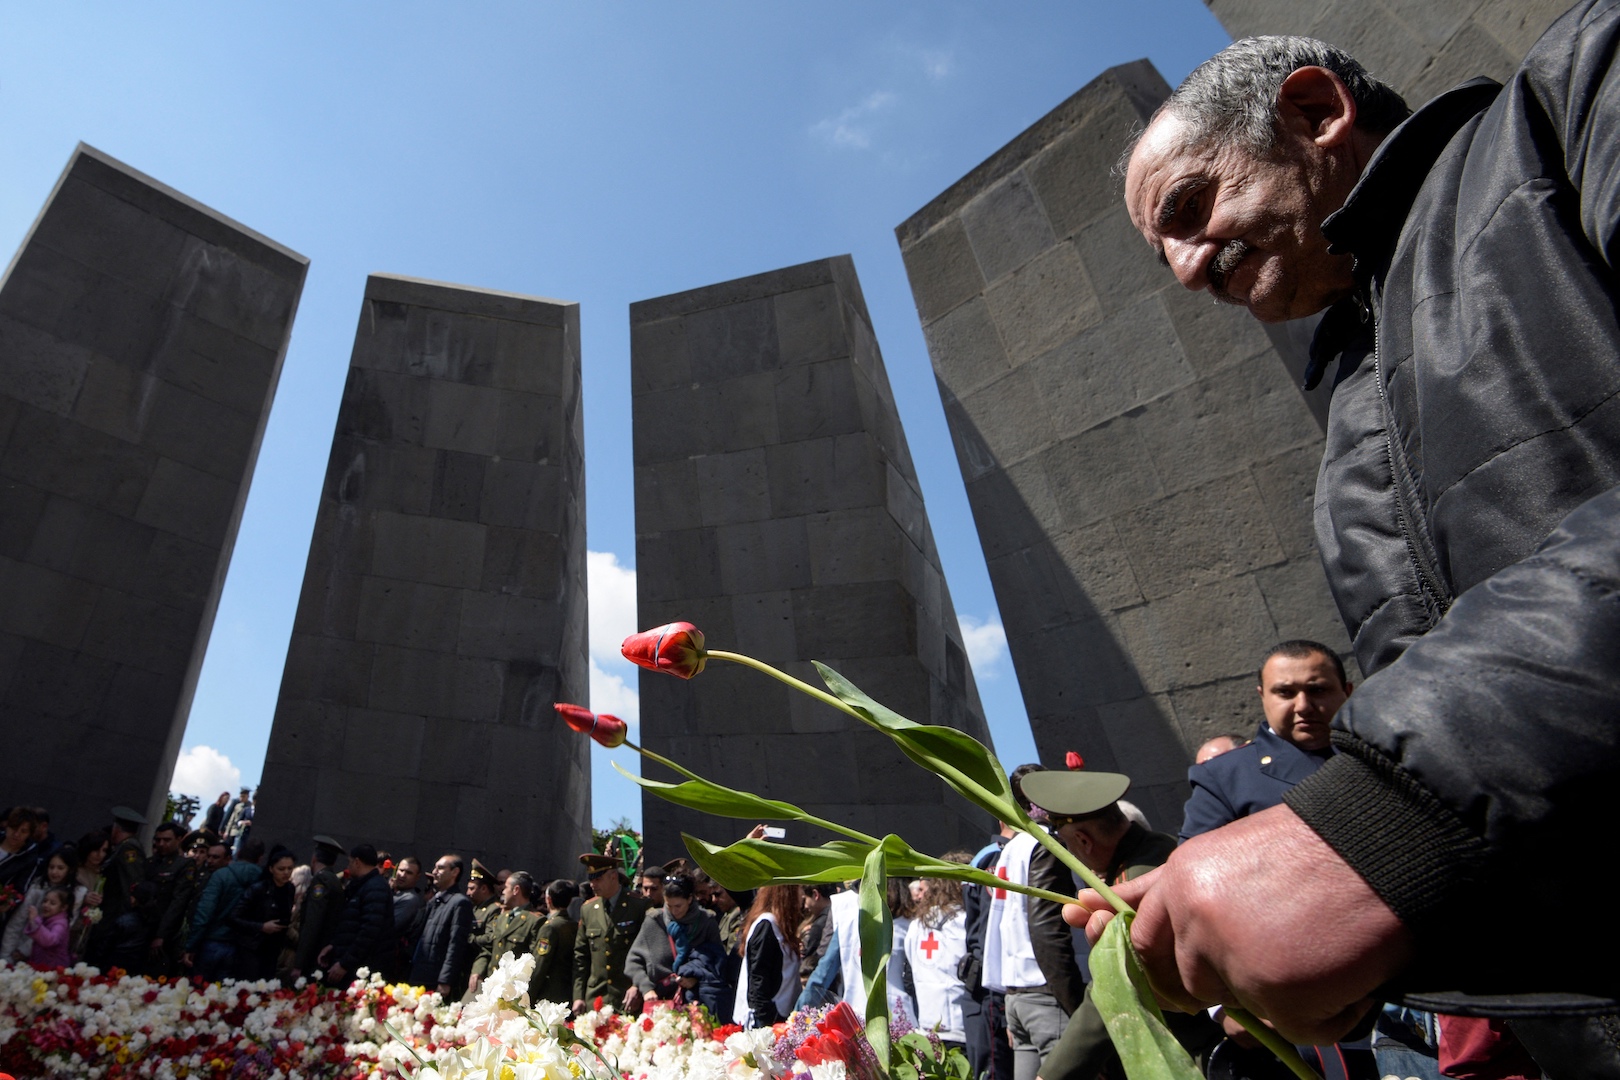 People attend a ceremony commemorating the 104th anniversary of the massacre of 1.5 million of Armenians by Ottoman forces in 1915, at the Tsitsernakaberd memorial in Yerevan on 24 April 2019 (AFP)